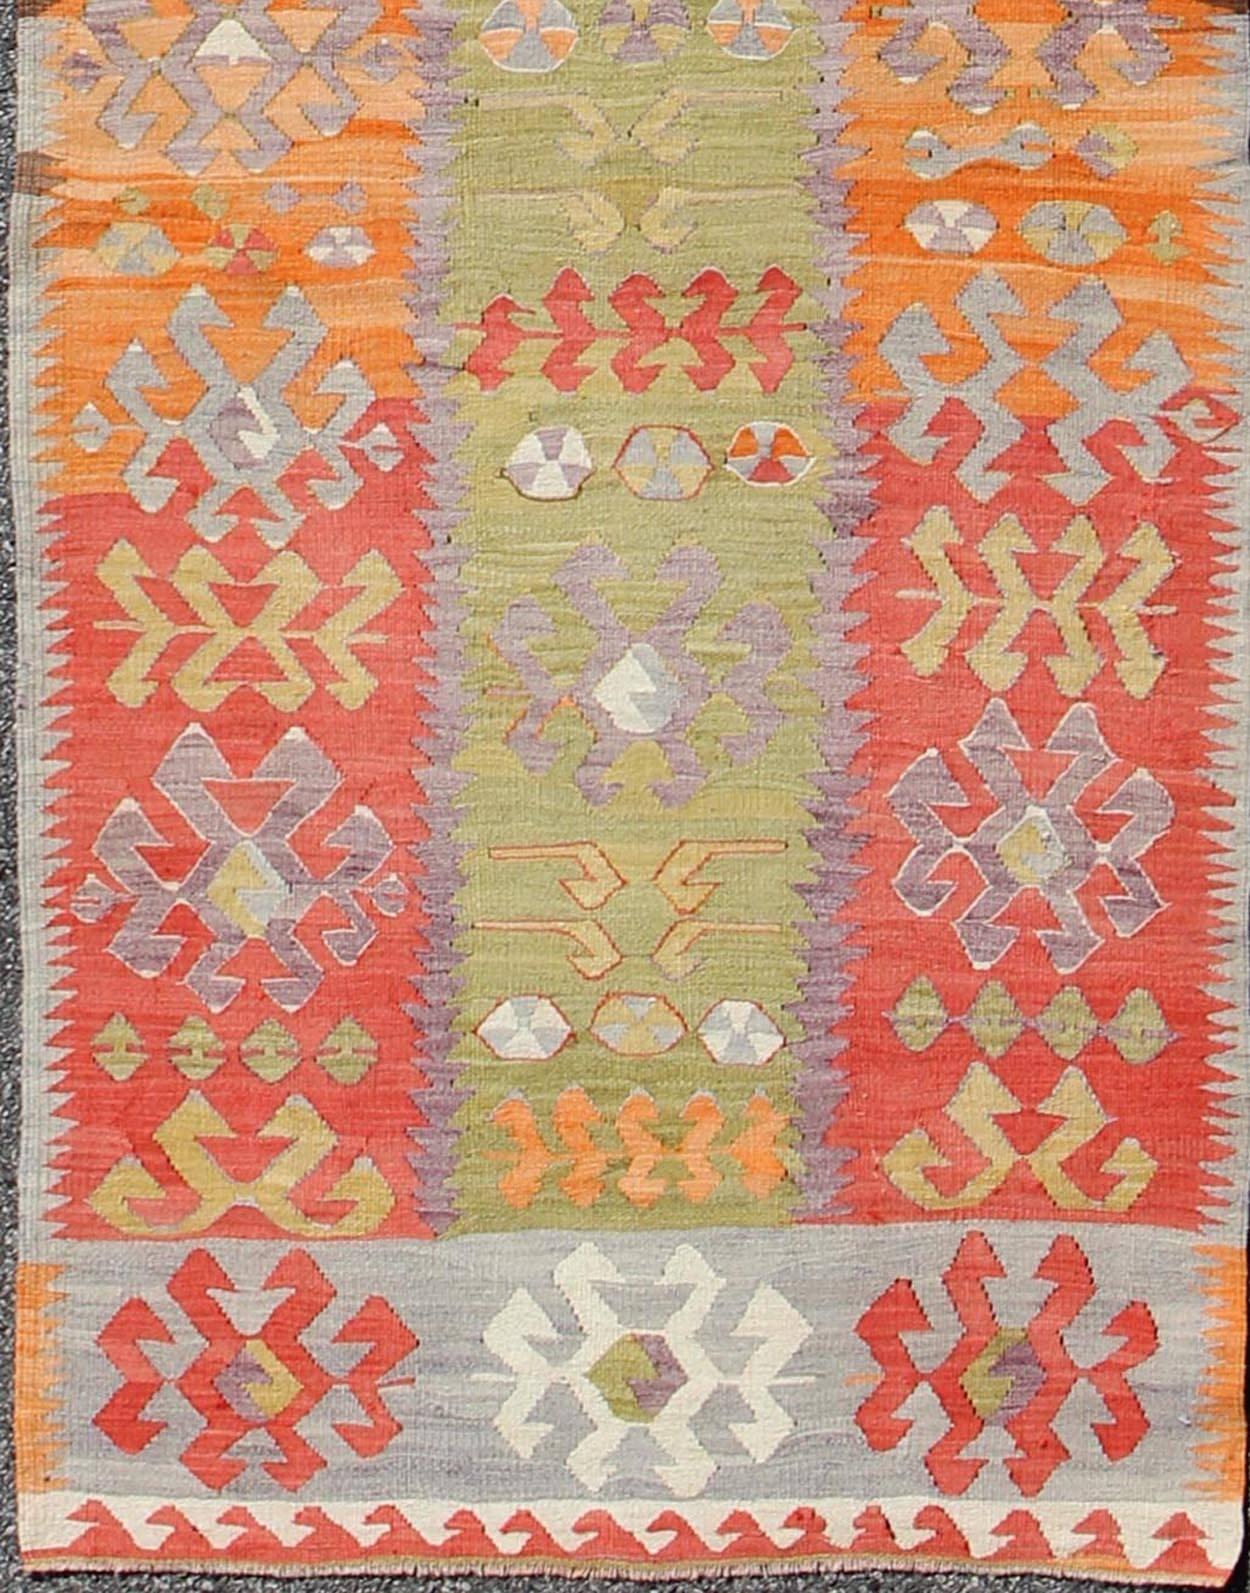 Long Kilim Runner with Tribal Design in Yellow Green, Red and Orange.
Set on a citron-green background, this long vintage runner displays a unique color combination and design, rendered in various motifs.
Measures: 3' x 14'2.